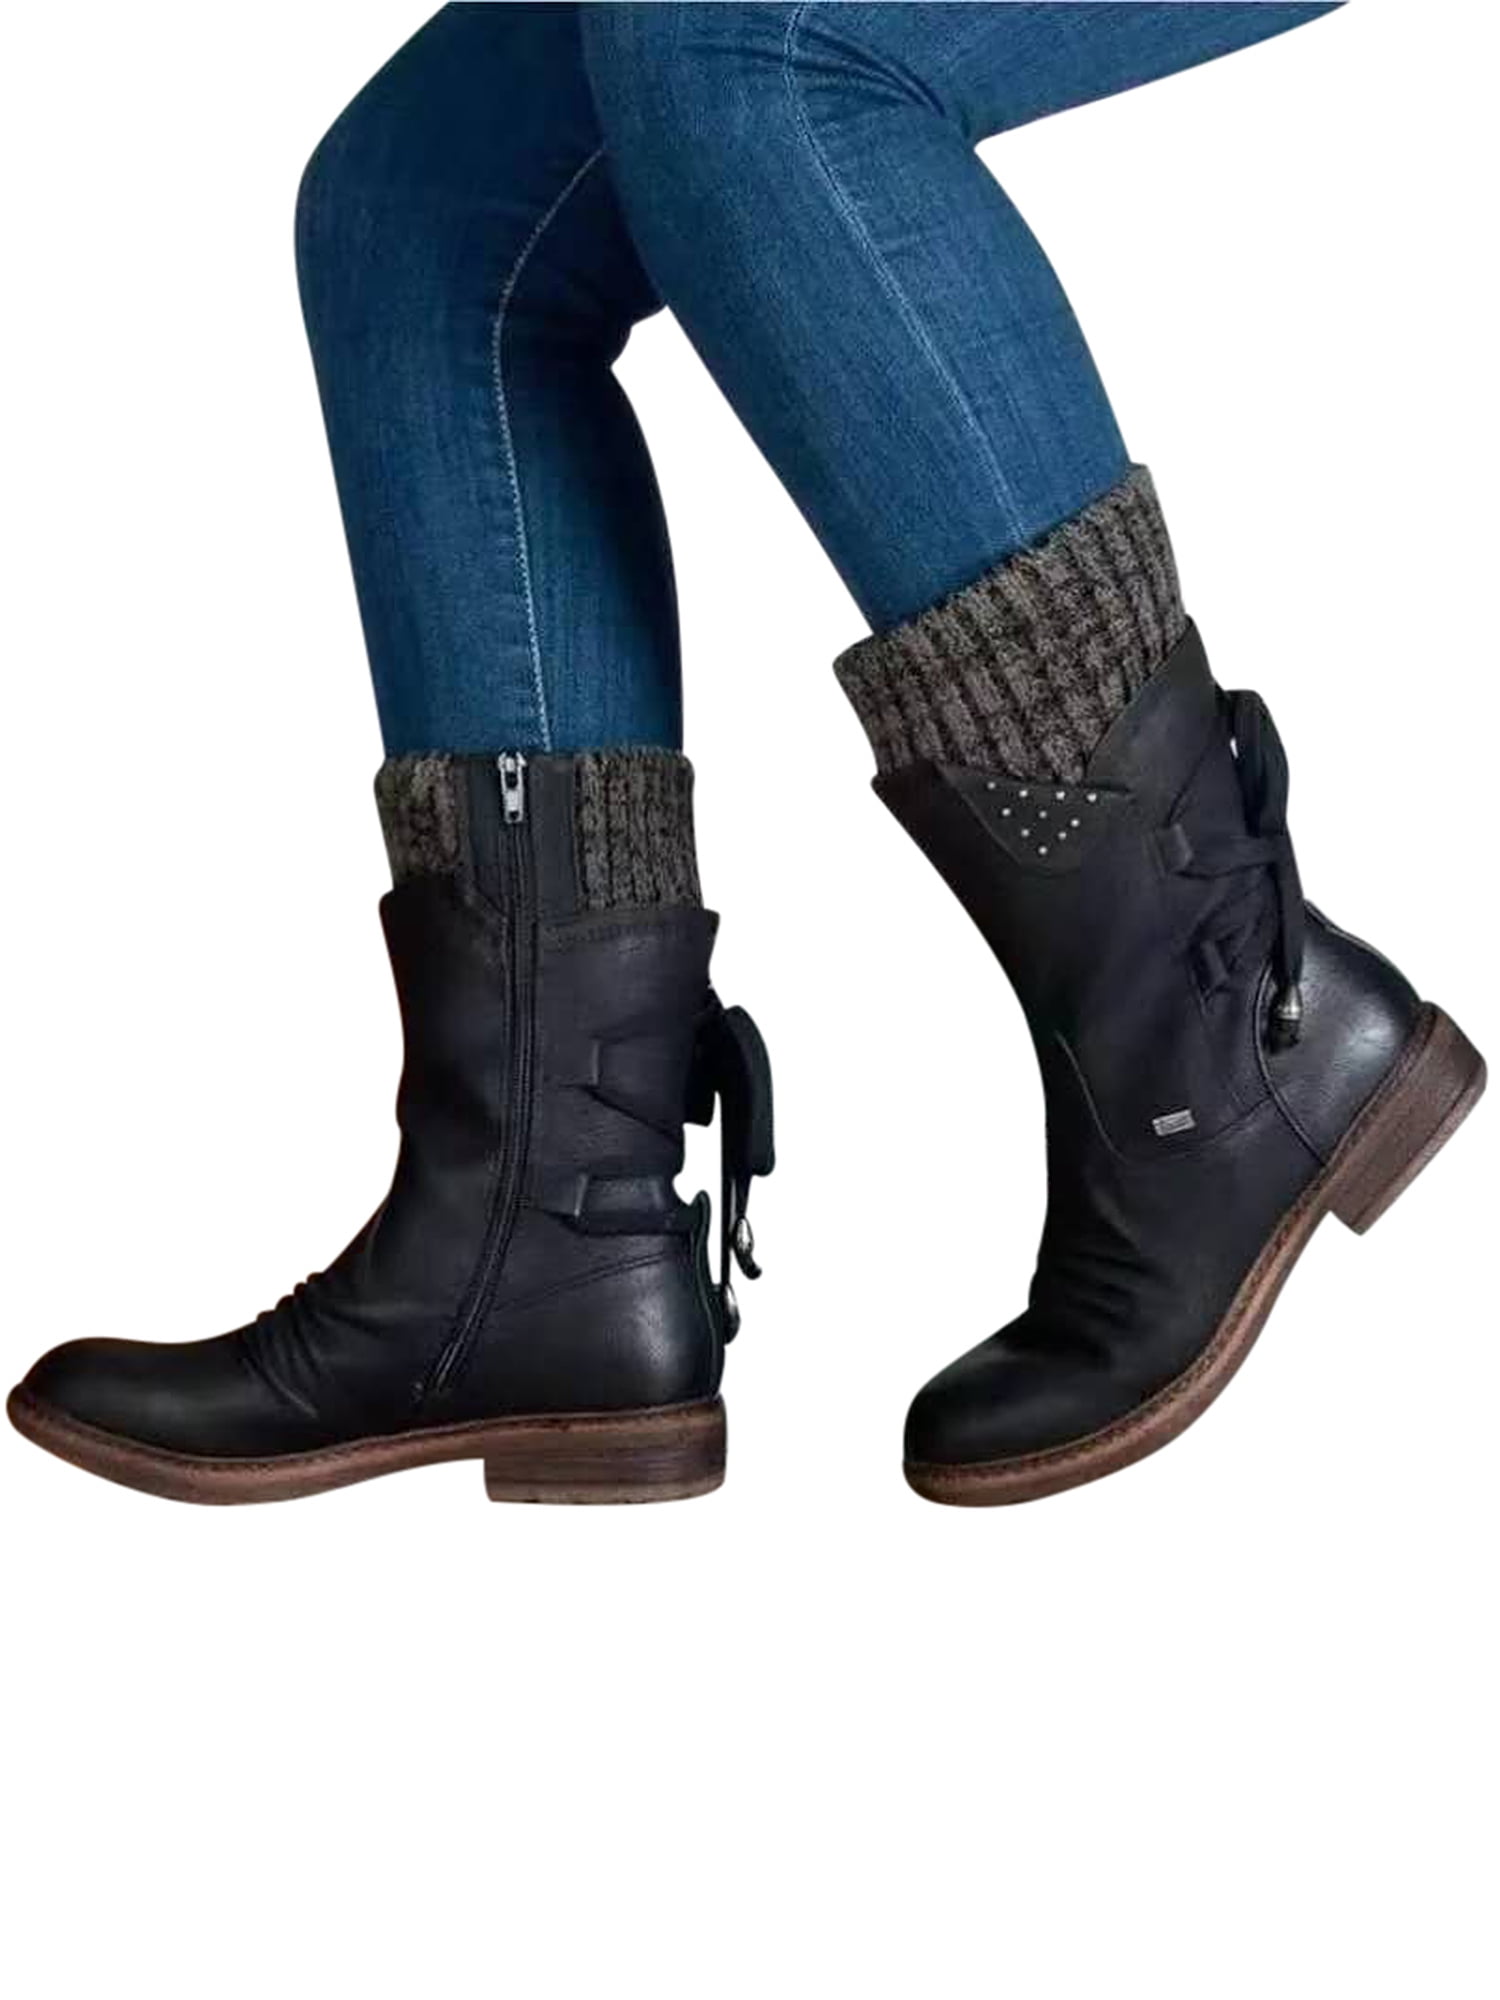 Details about   Women Winter Snow Mid Calf Boots Warm Casual Plush Lined Outdoor Casual Shoes Sz 